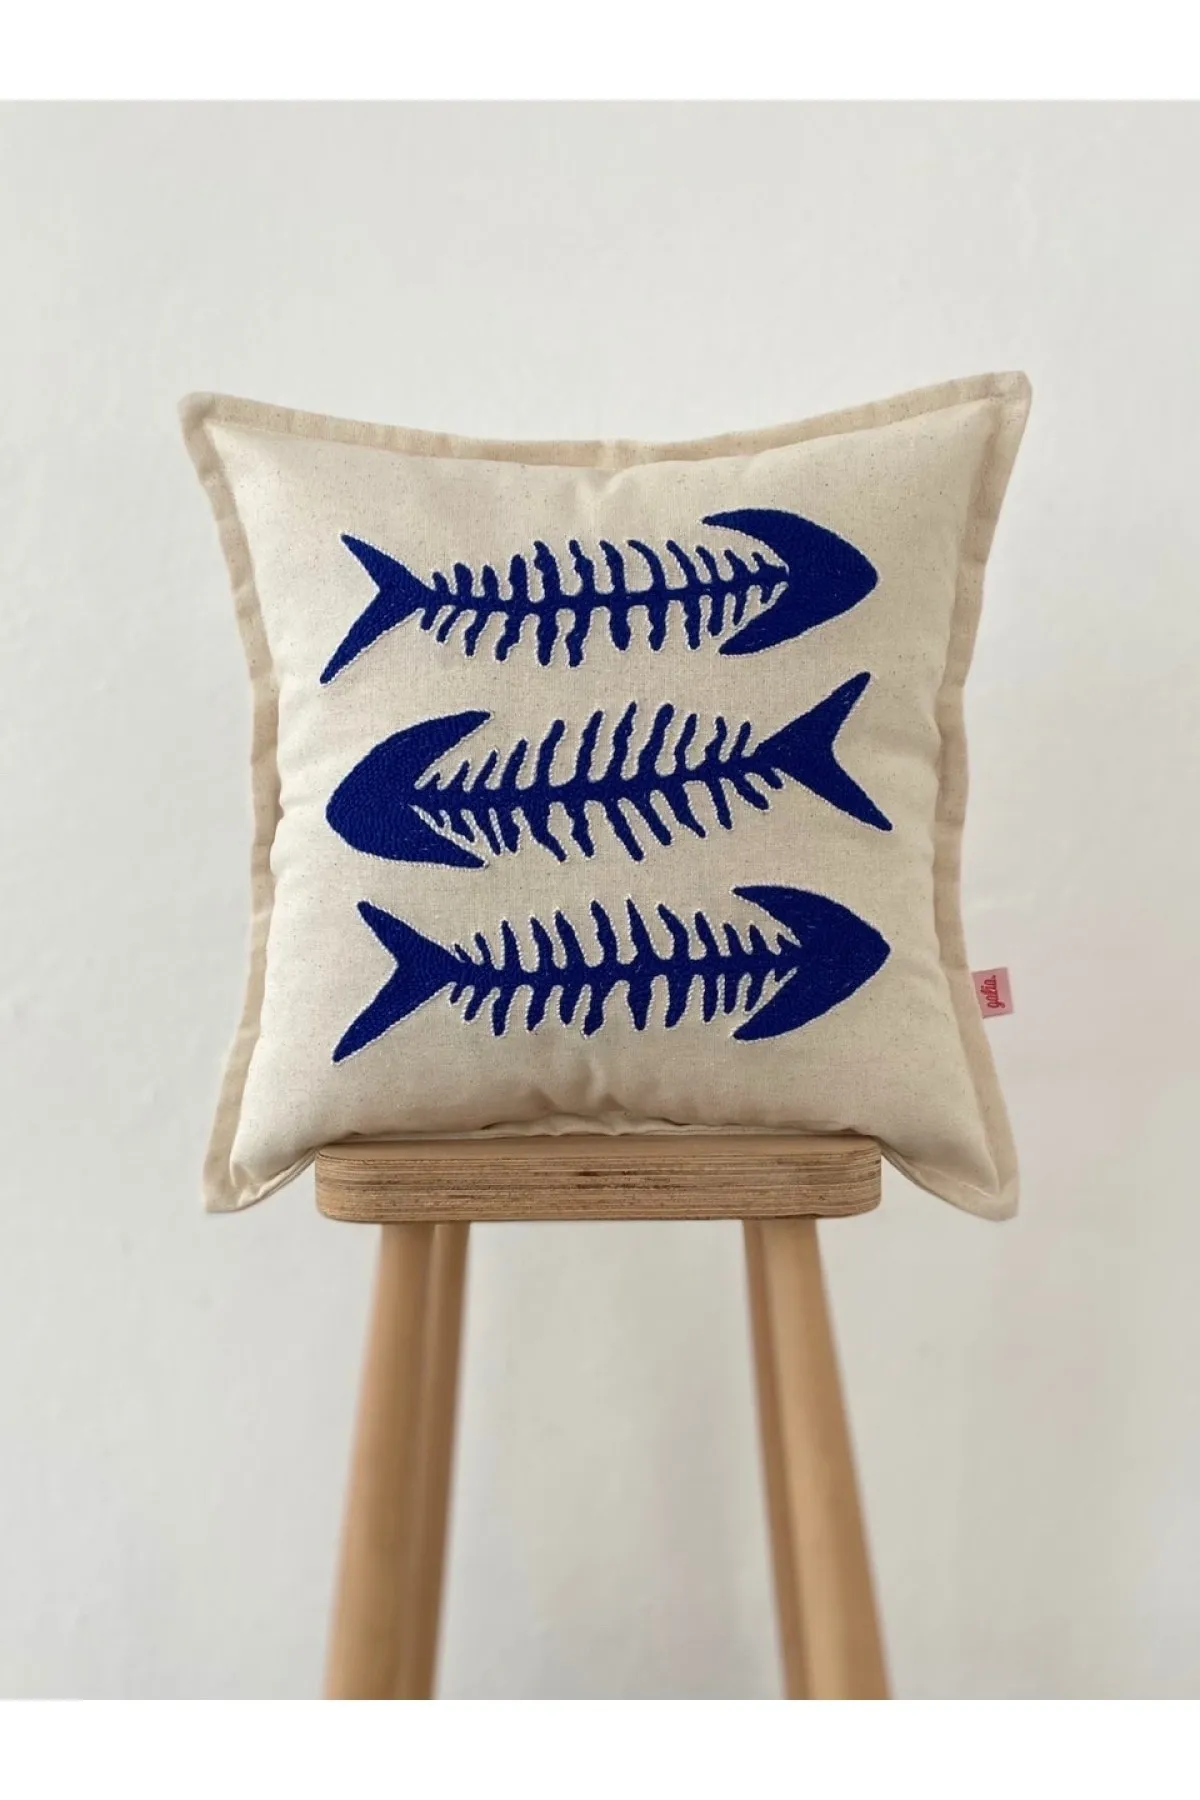 Marine Series Triple Fish Washed Linen Punch Throw Pillow Cover